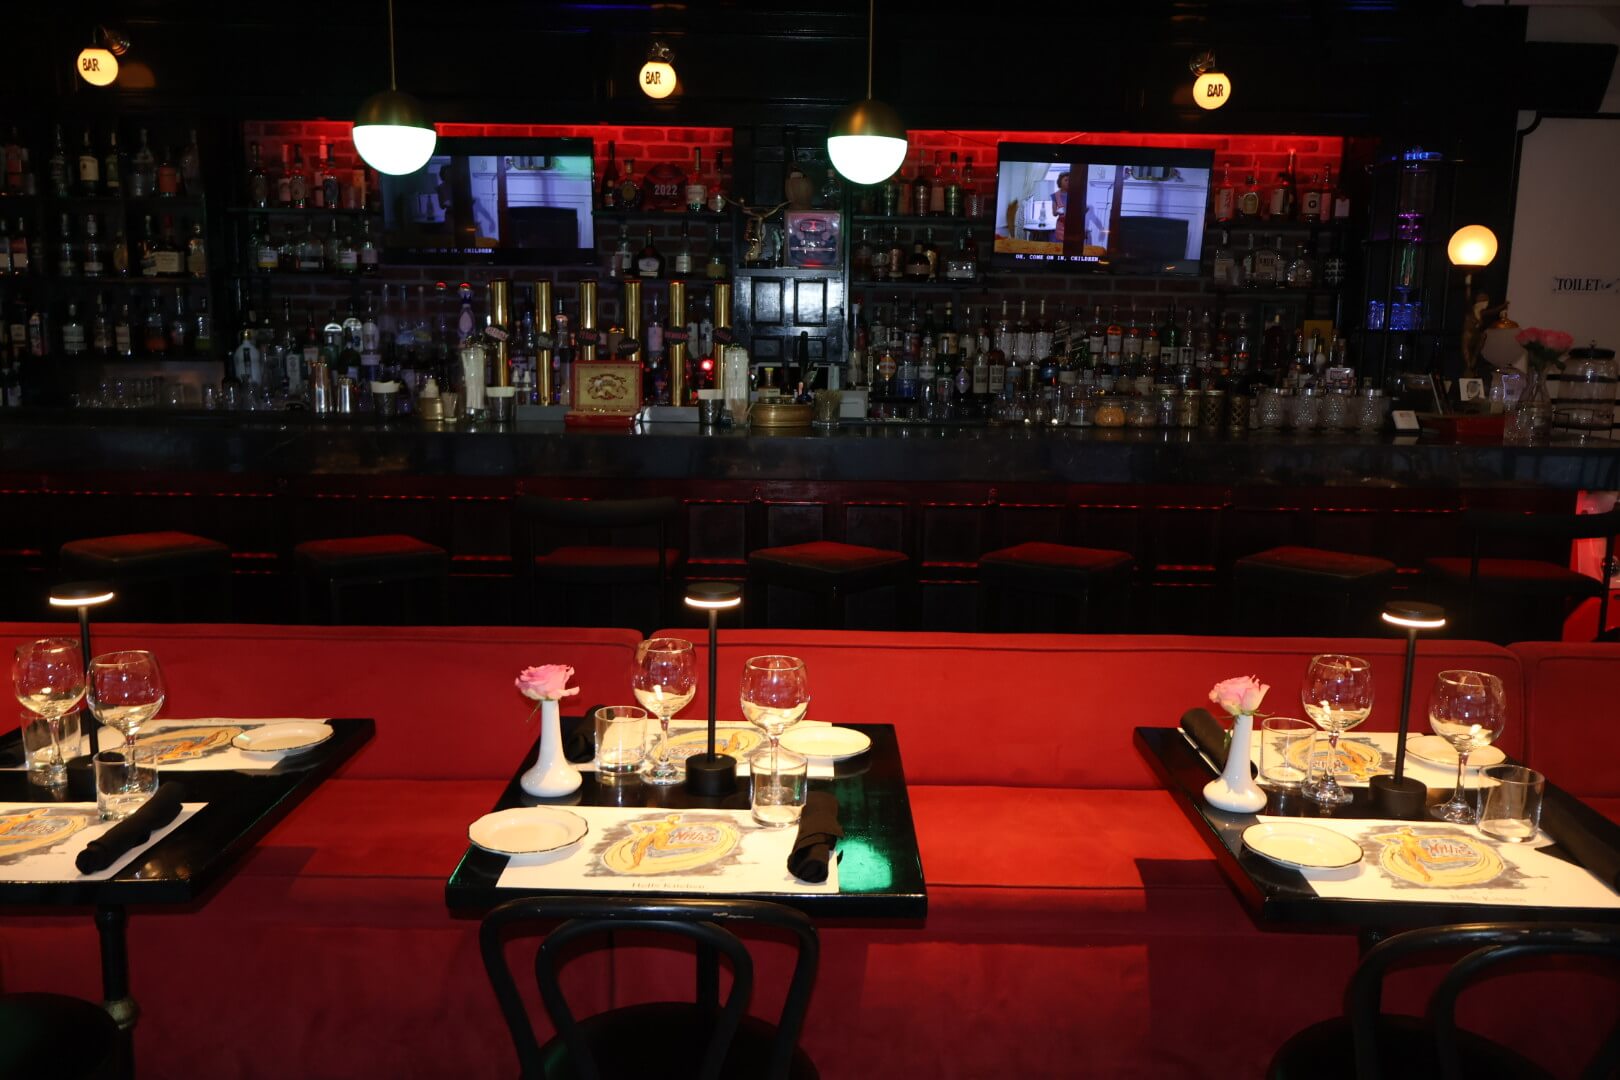 Three black tables and chairs against a red booth with fully stocked bar behind